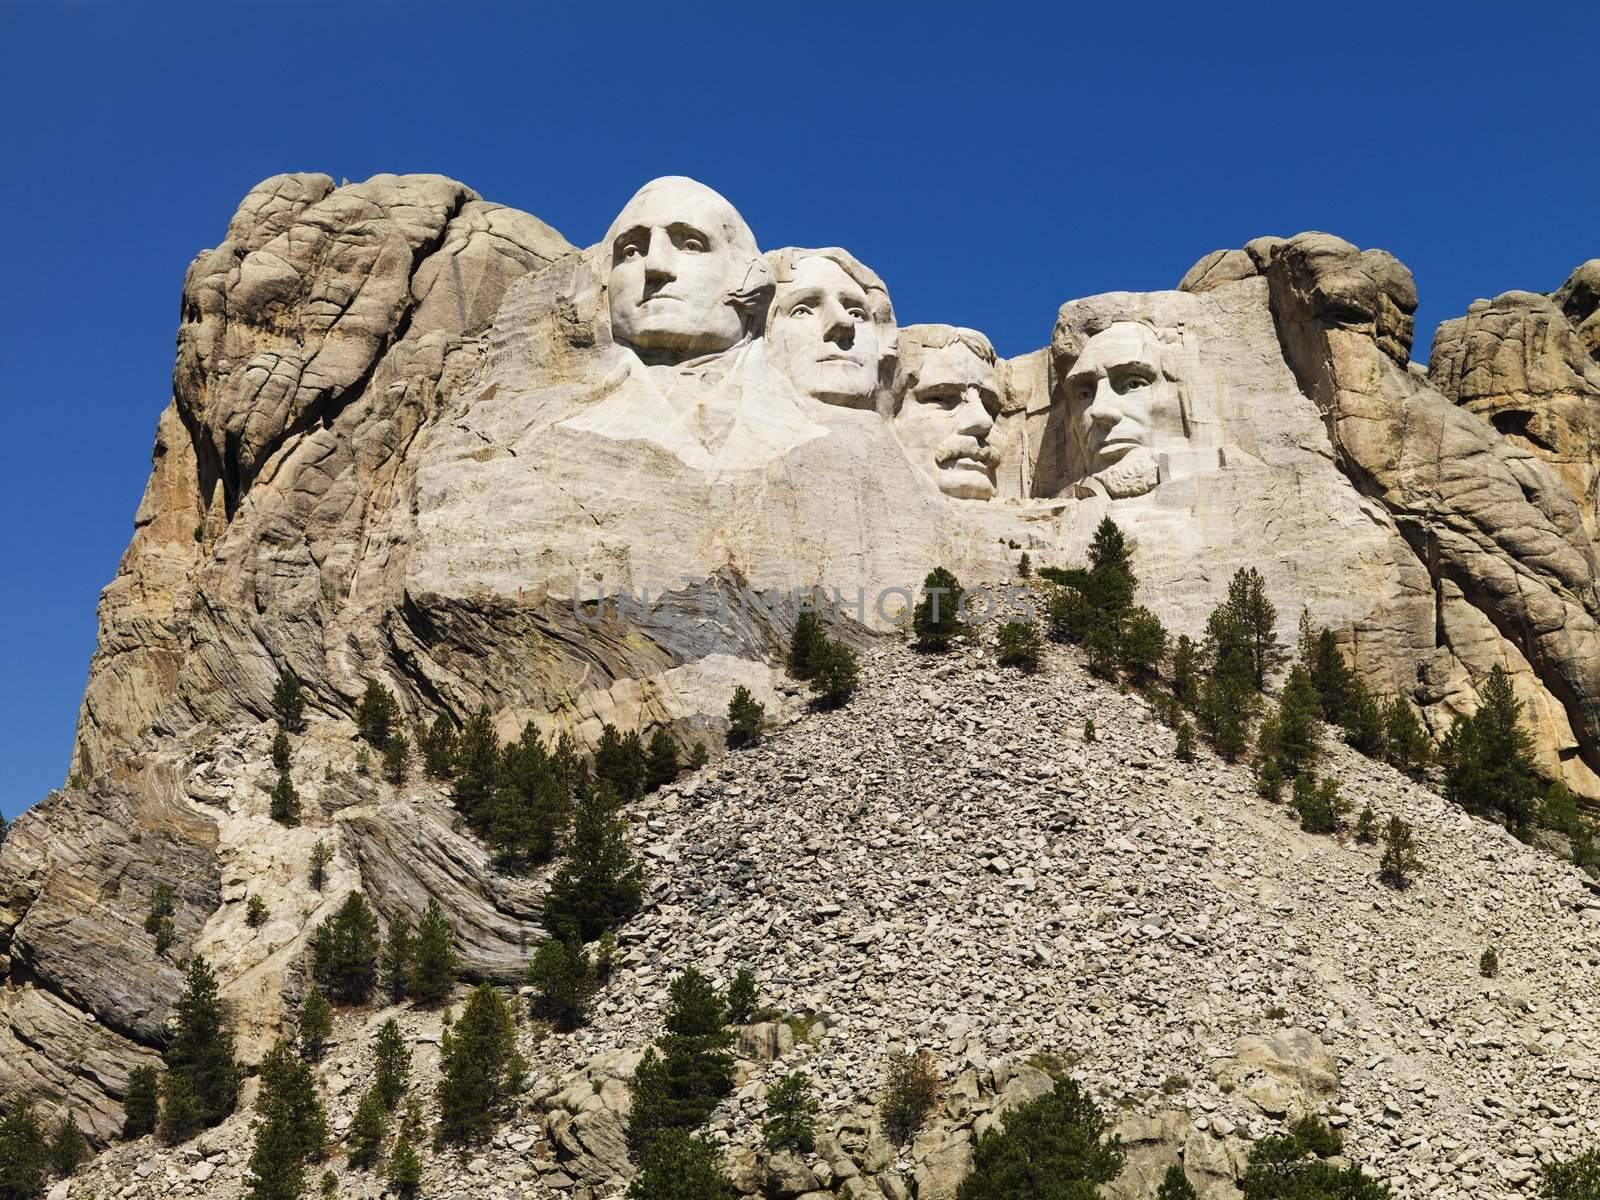 Mount Rushmore National Memorial with mountain and trees.